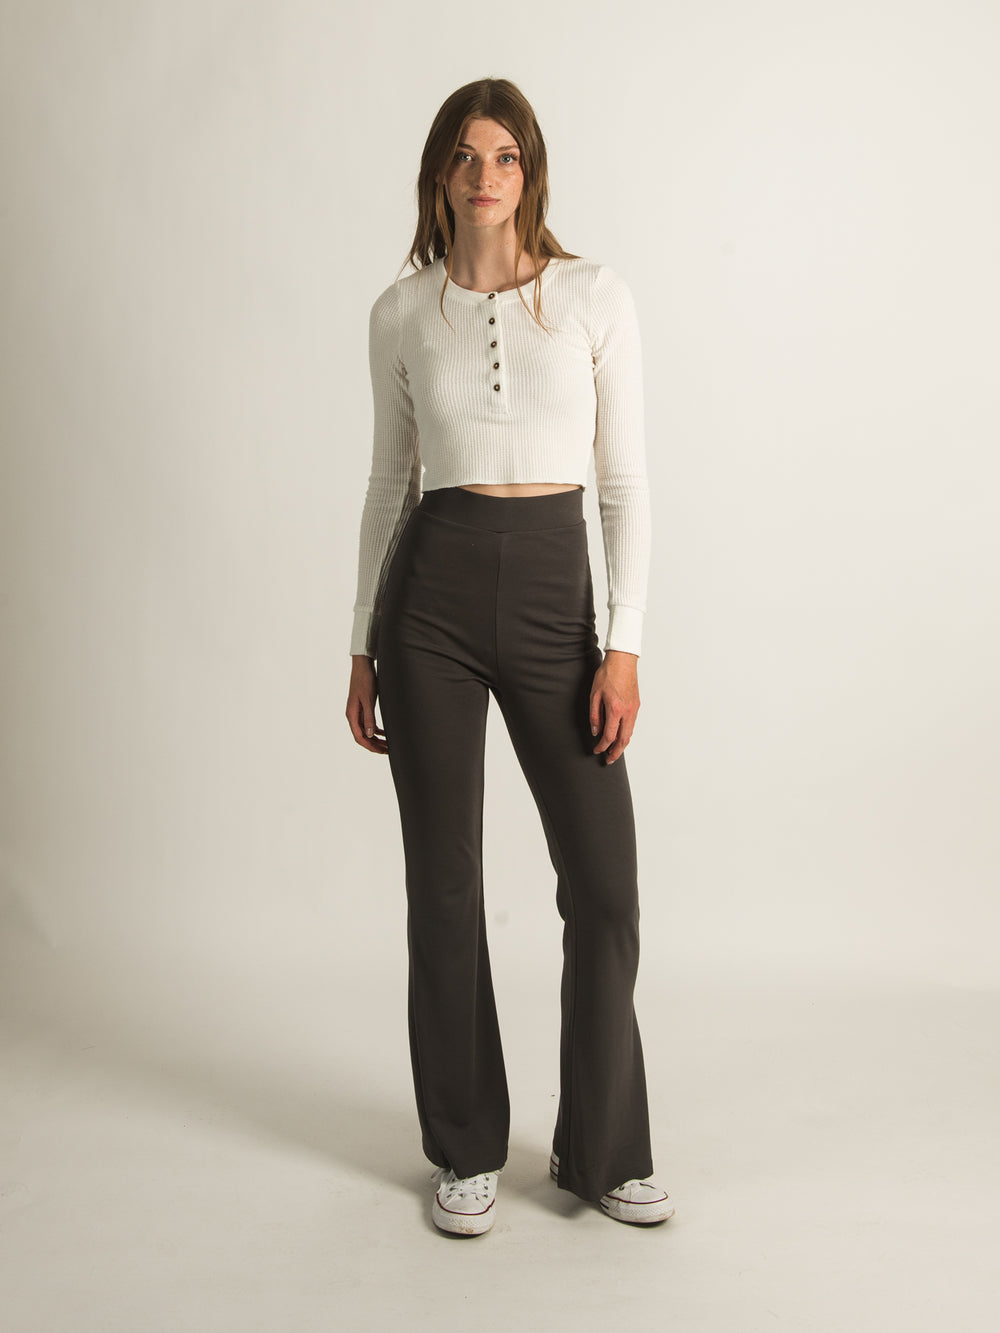 HARLOW HIGH RISE FLARE PANTS - CLEARANCE